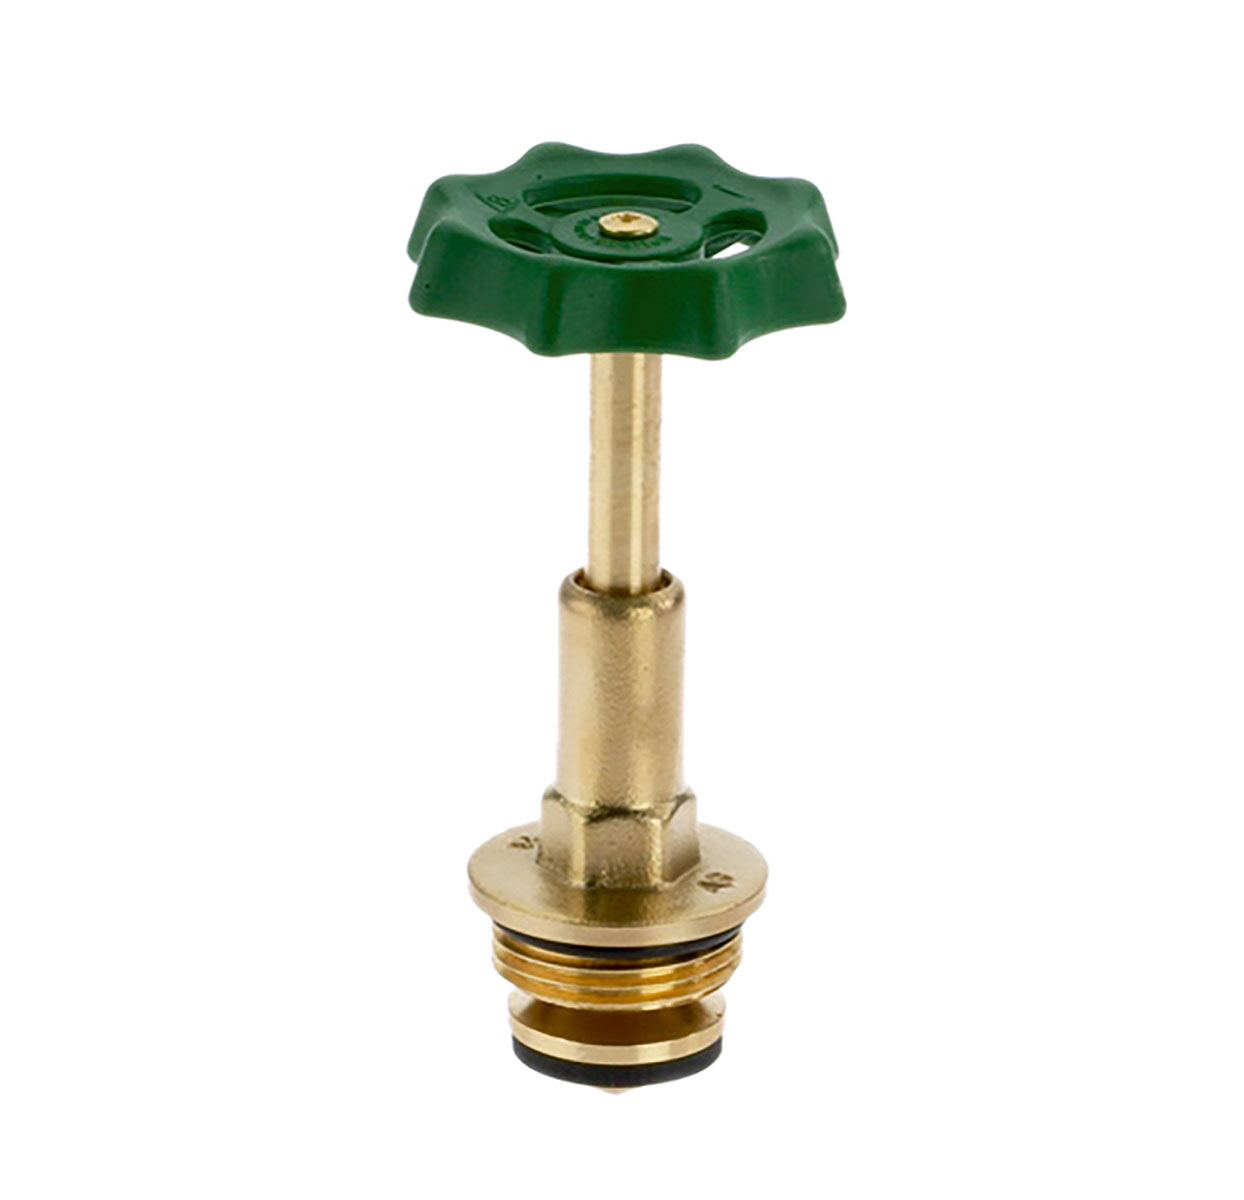 1212200 - Brass Upper-part with grease chamber for free-flow valves, rising spindle